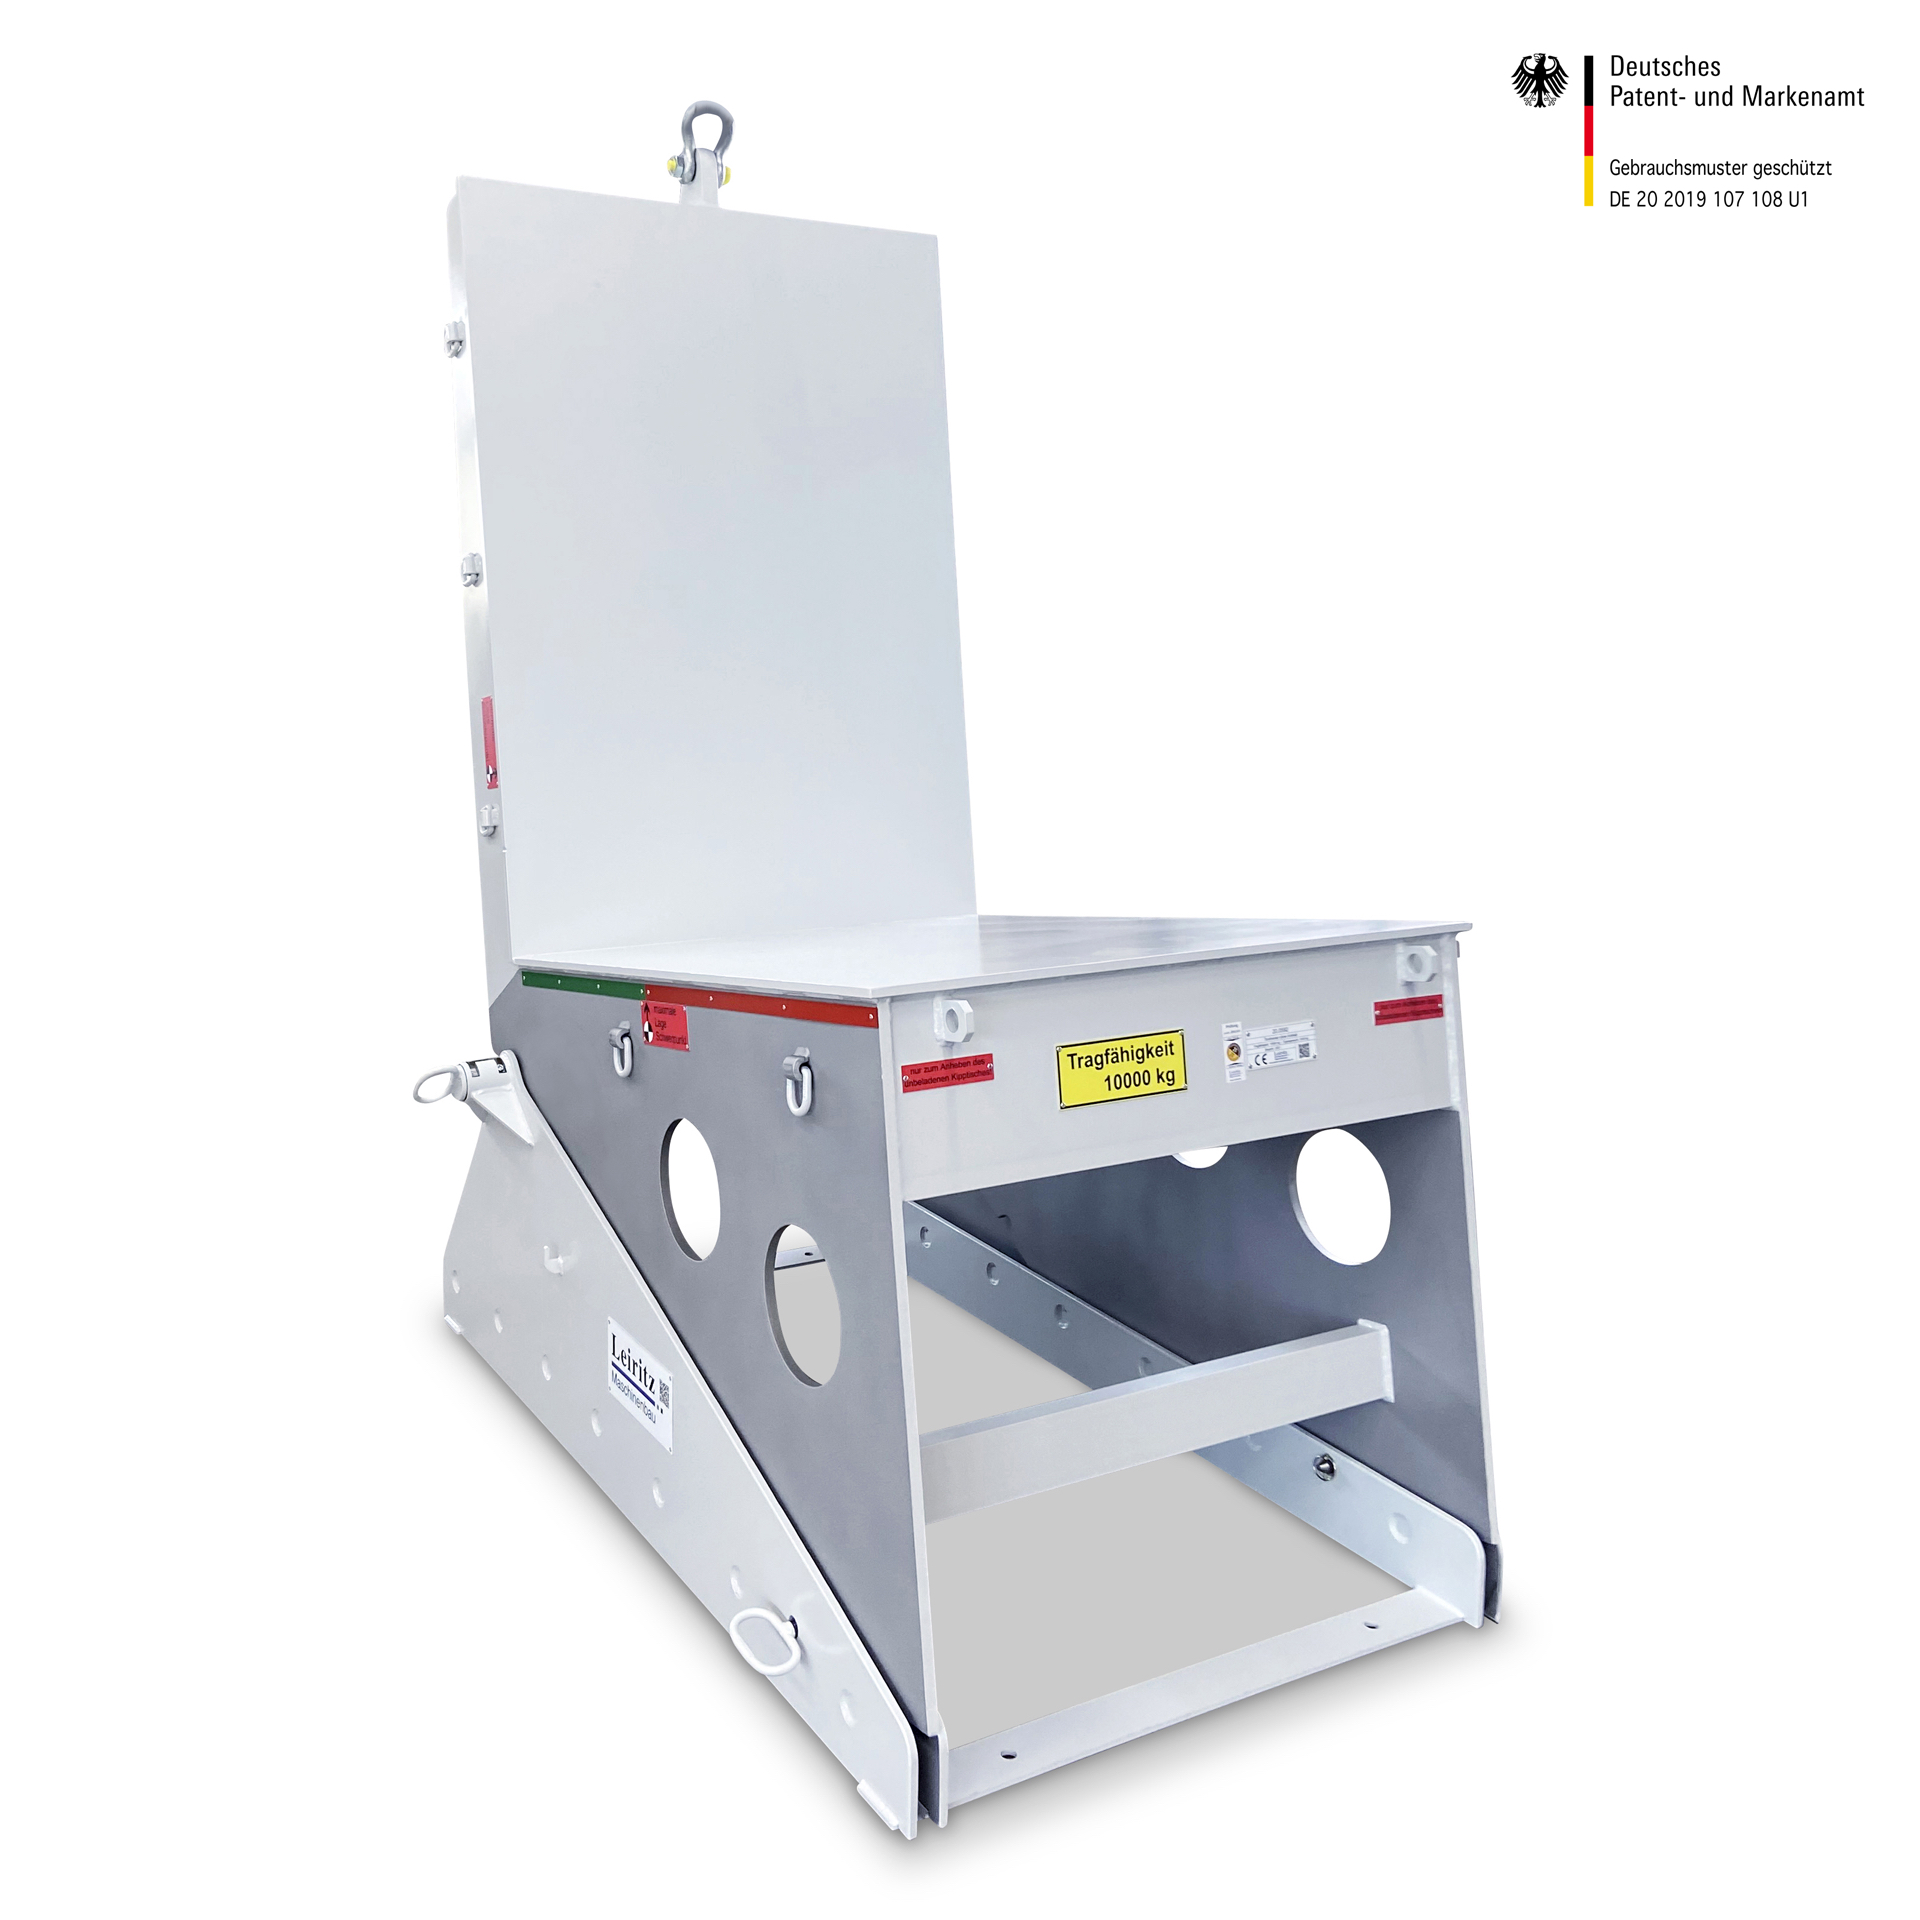 Leiritz is a premium producer for special Turnover Device in Bavaria.